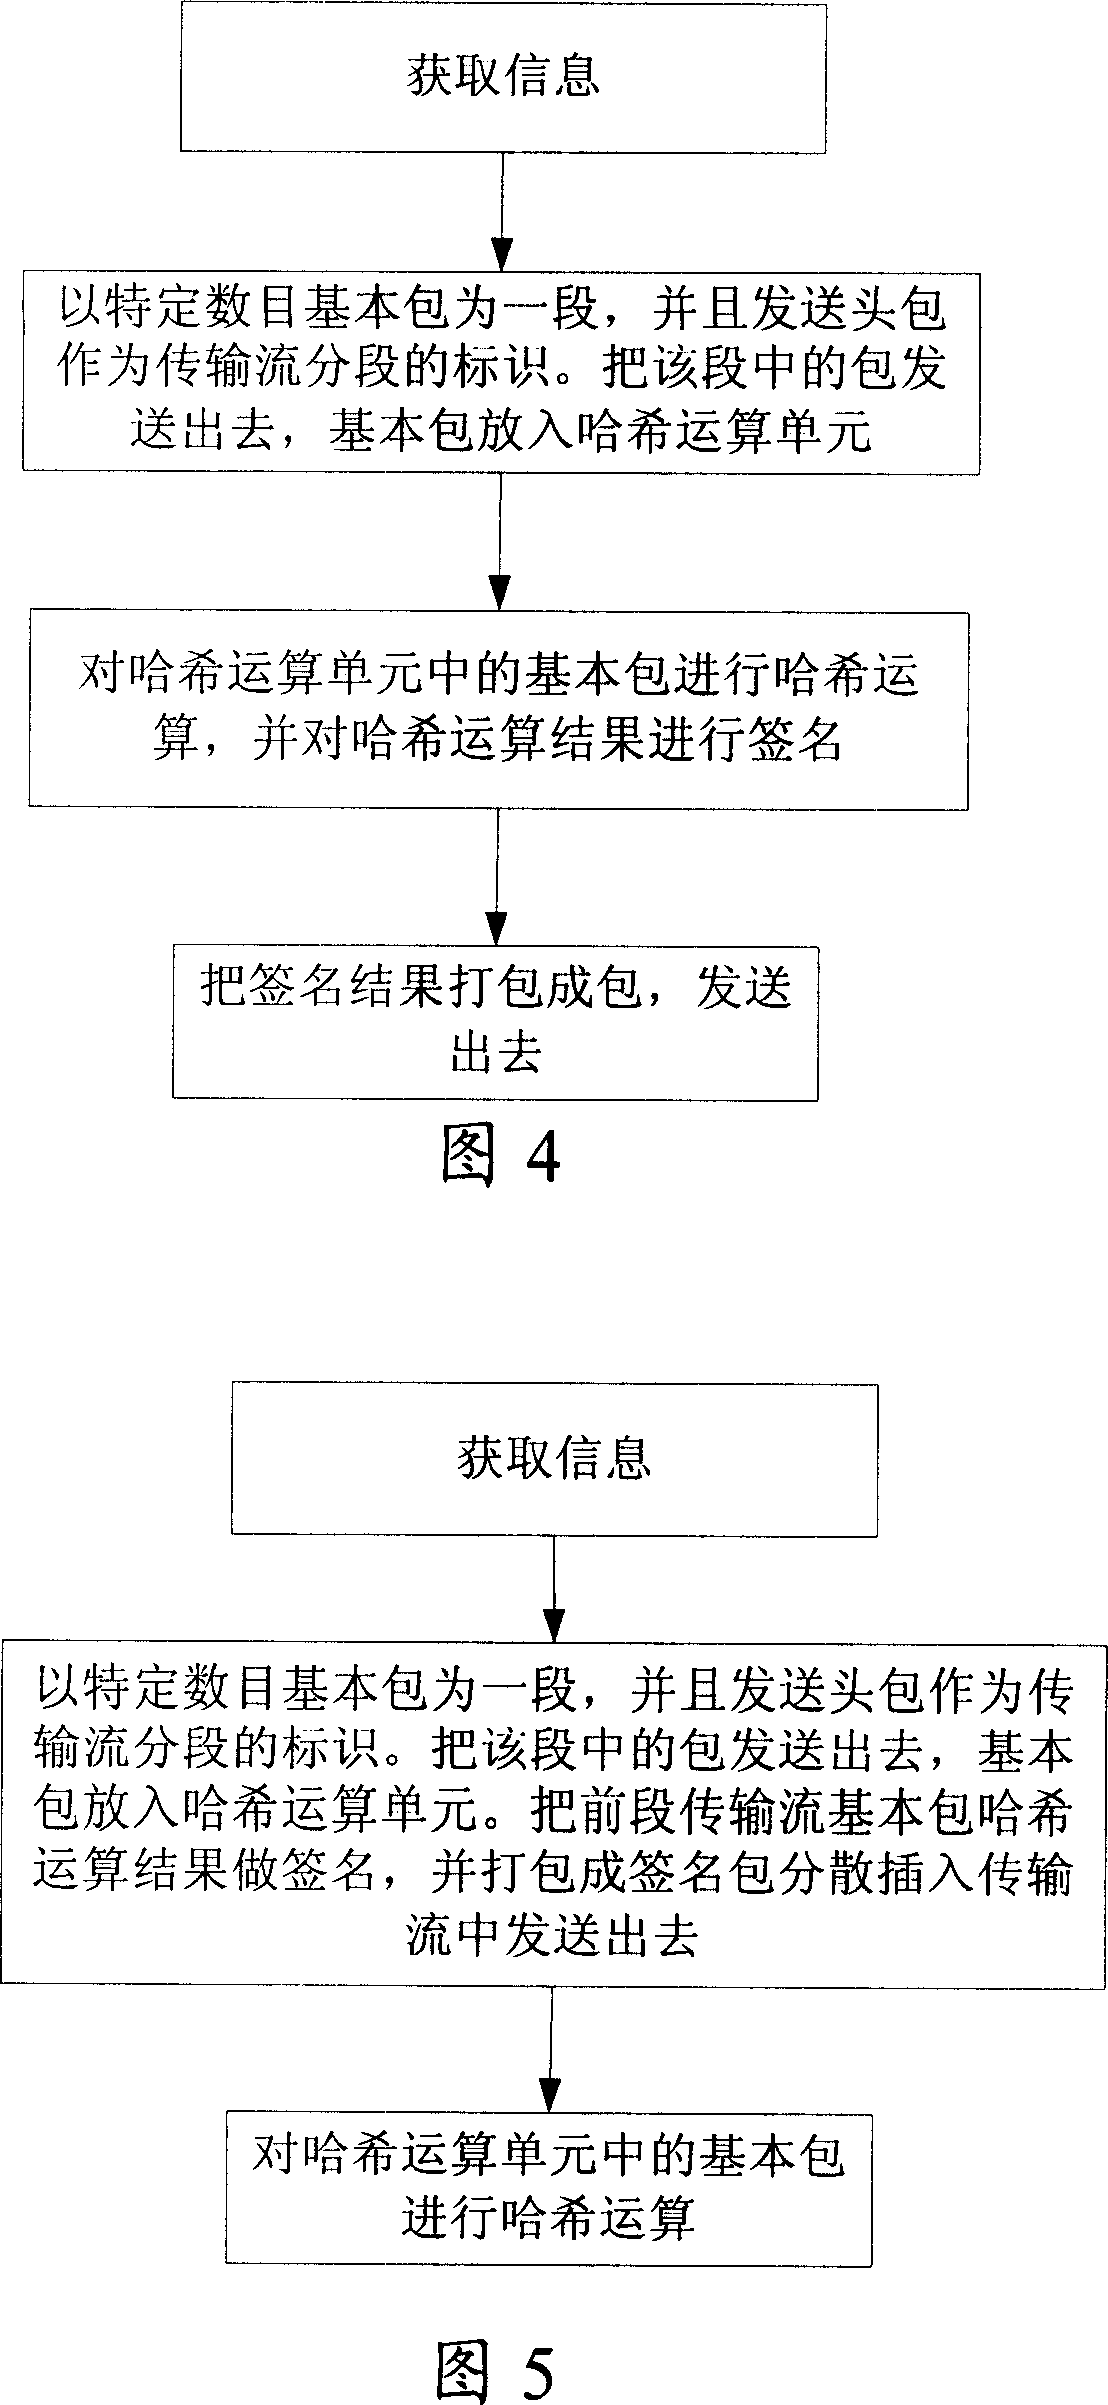 Method for real-time inserting signature and identifying signature indigit TV transmission flow